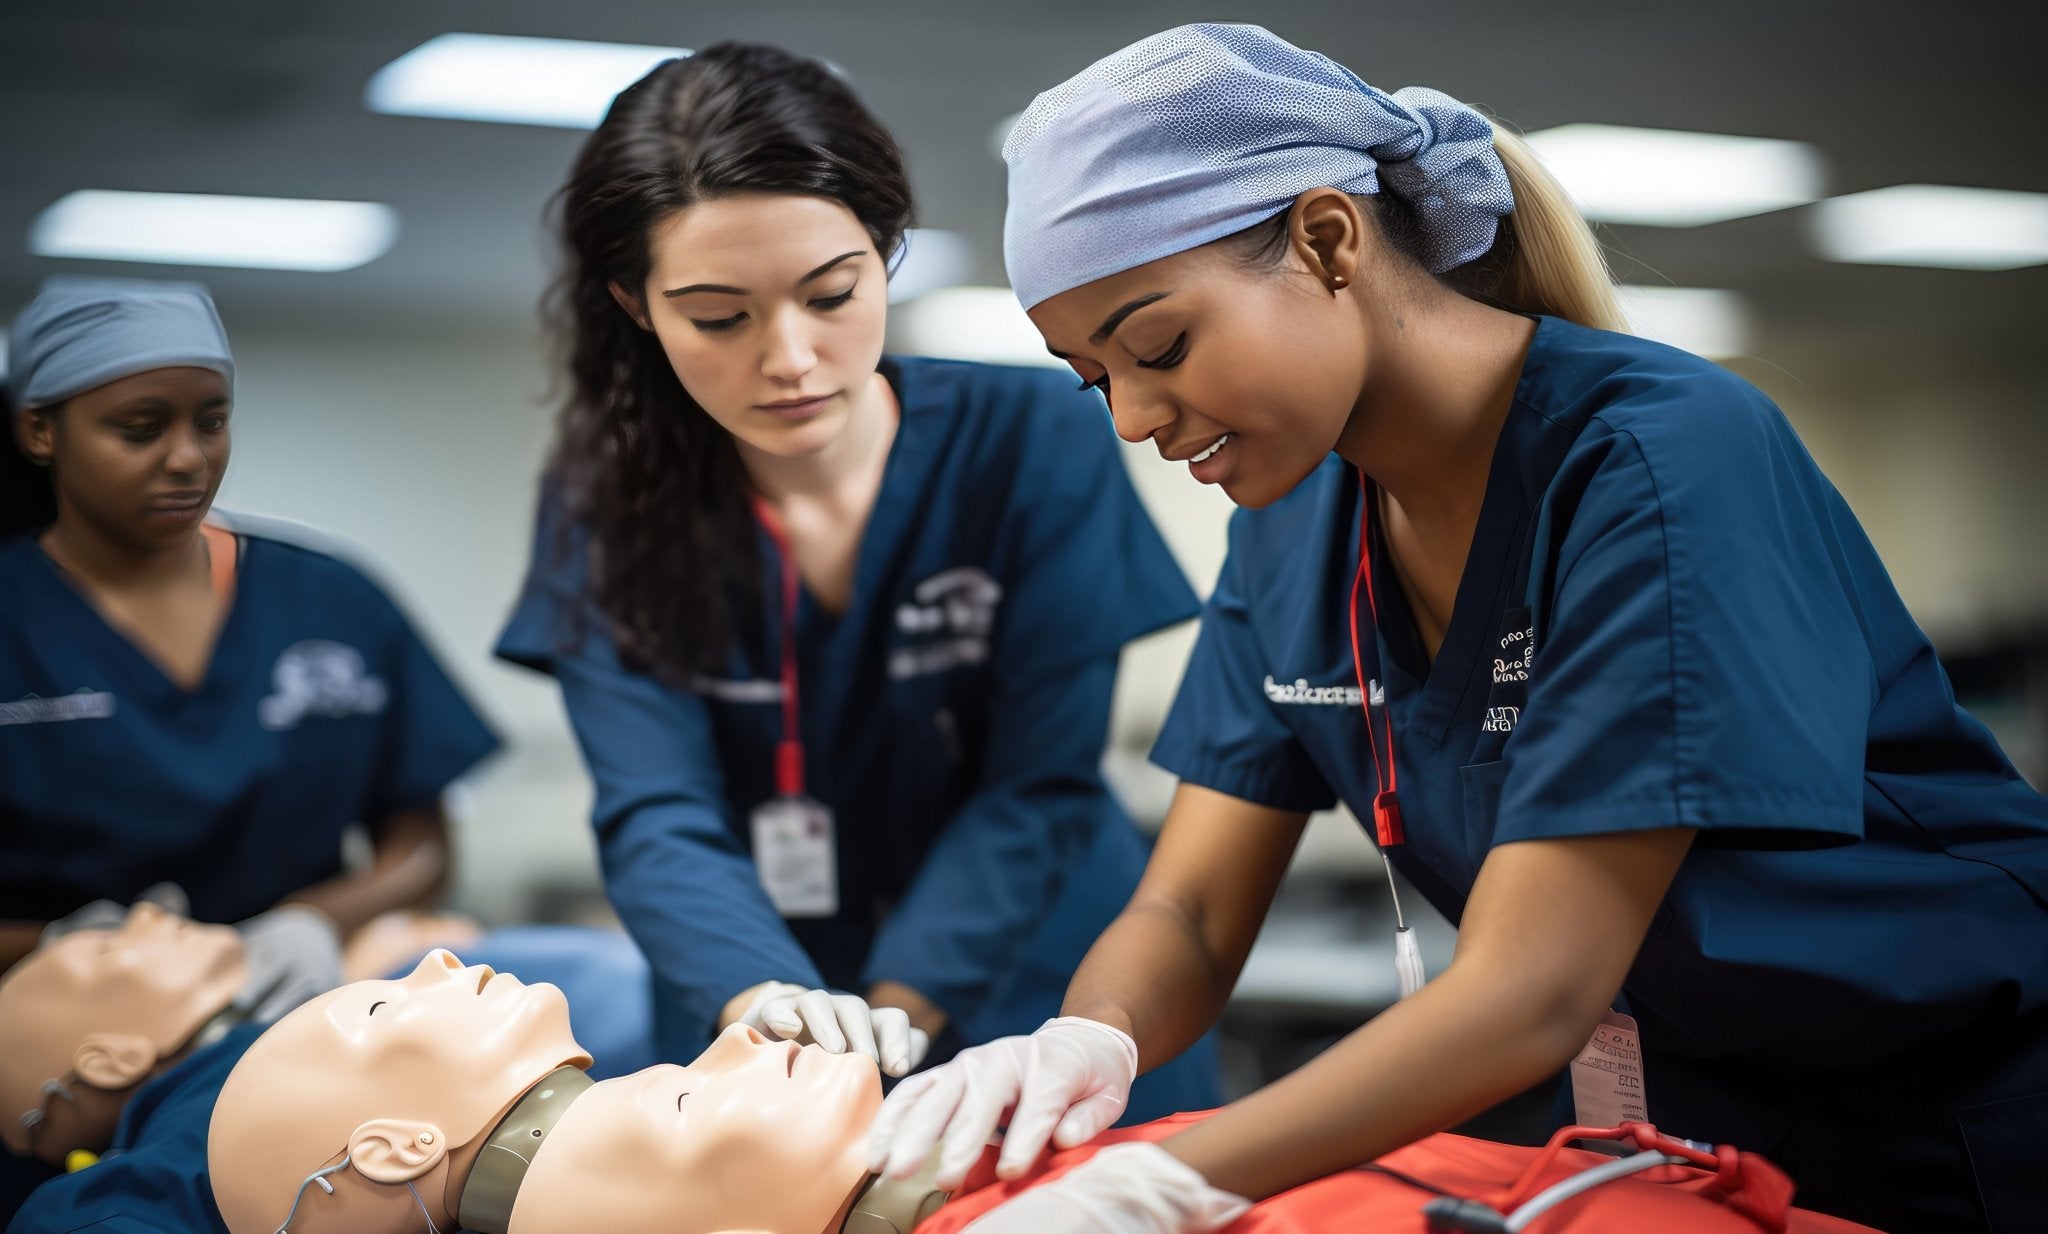 Emerging Trends in Medical Training & Education - American Hospital Supply